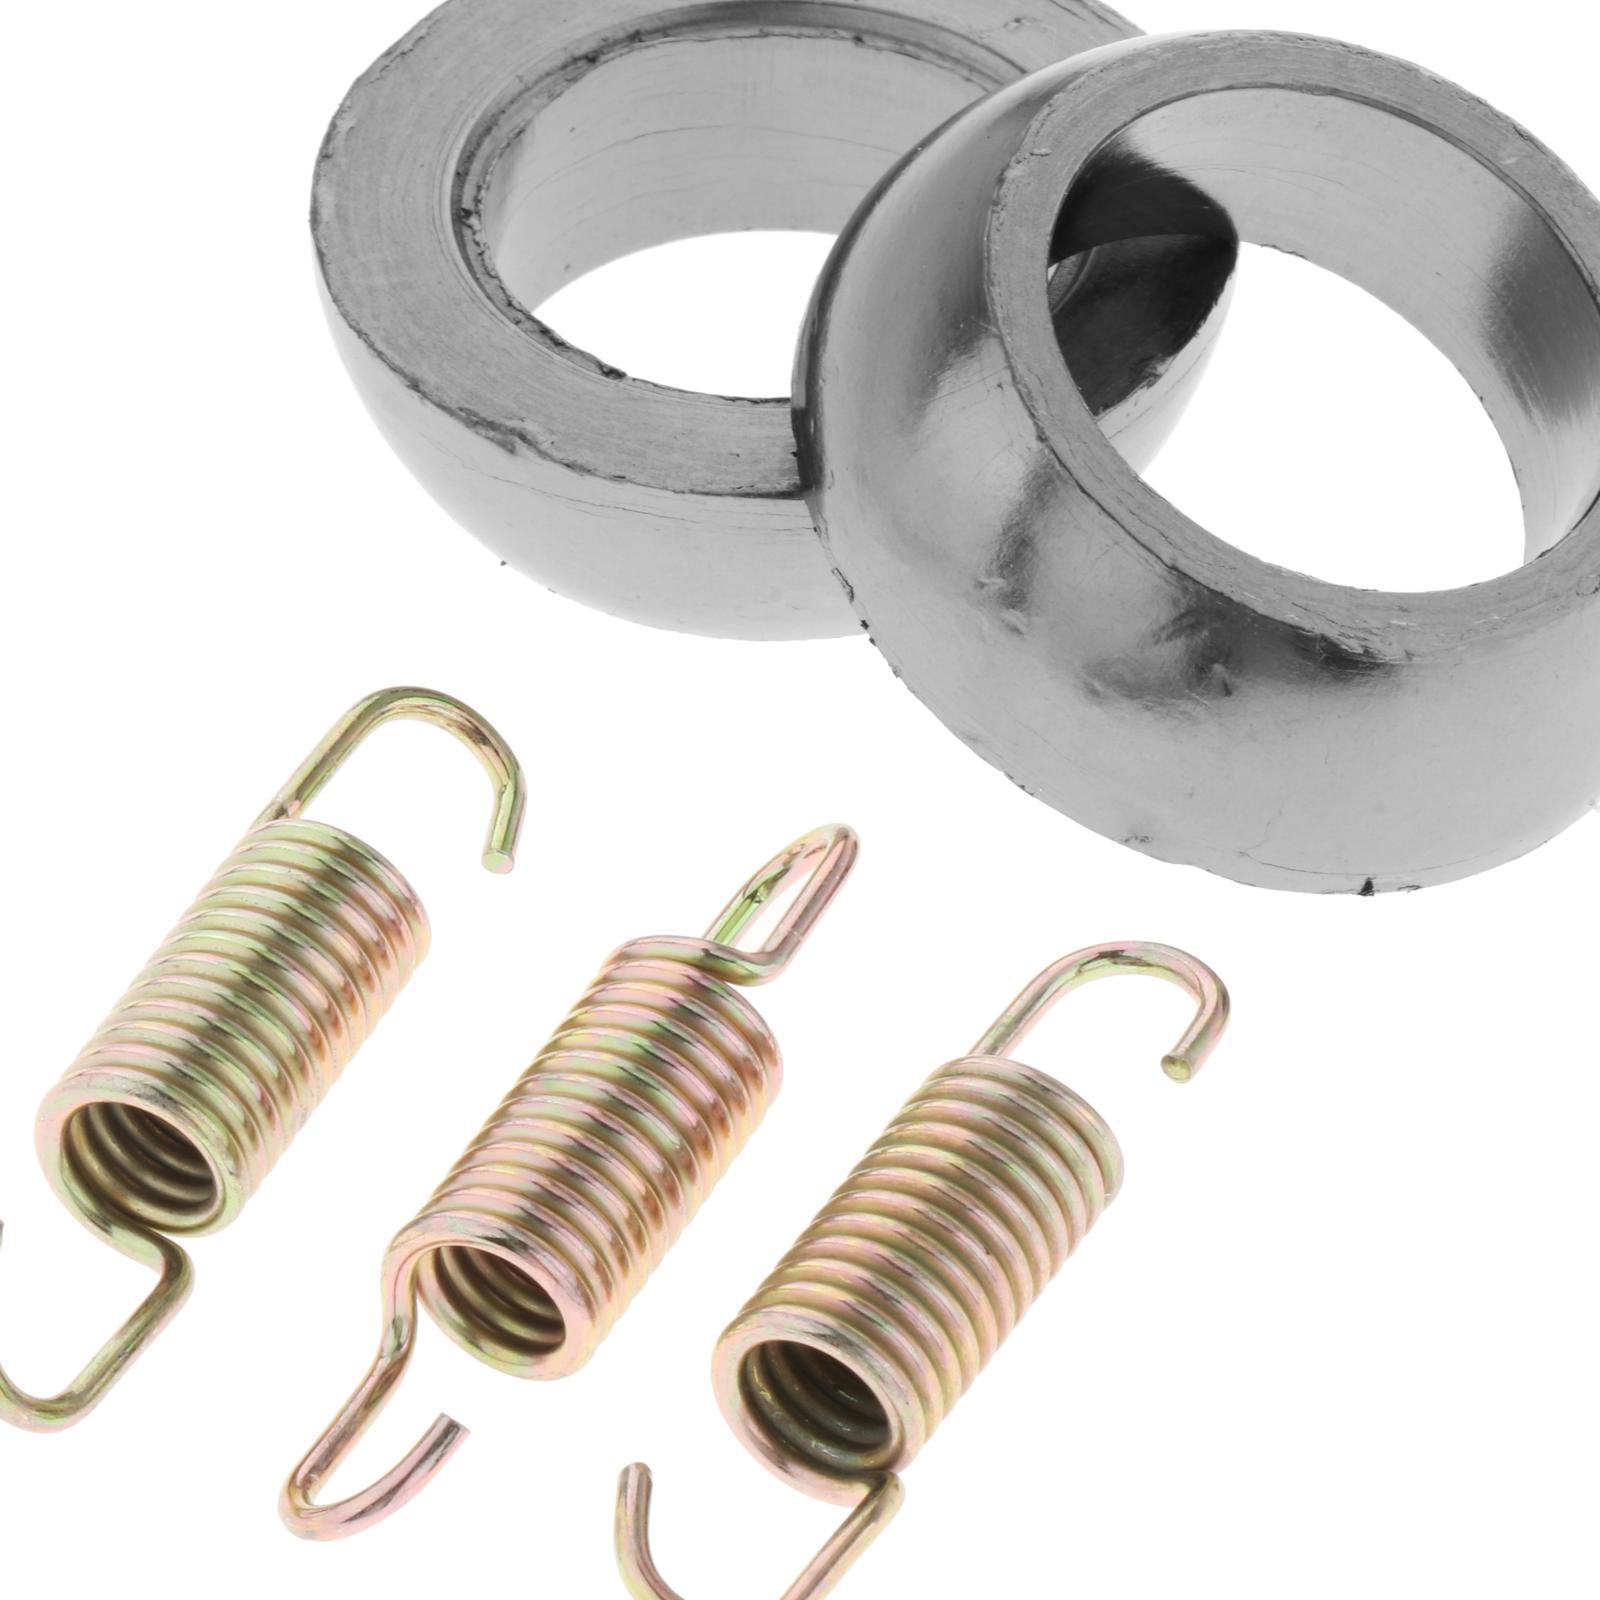 Exhaust Gasket & Spring Kit Replace for Arctic Cat 300 250 2x4 4x4